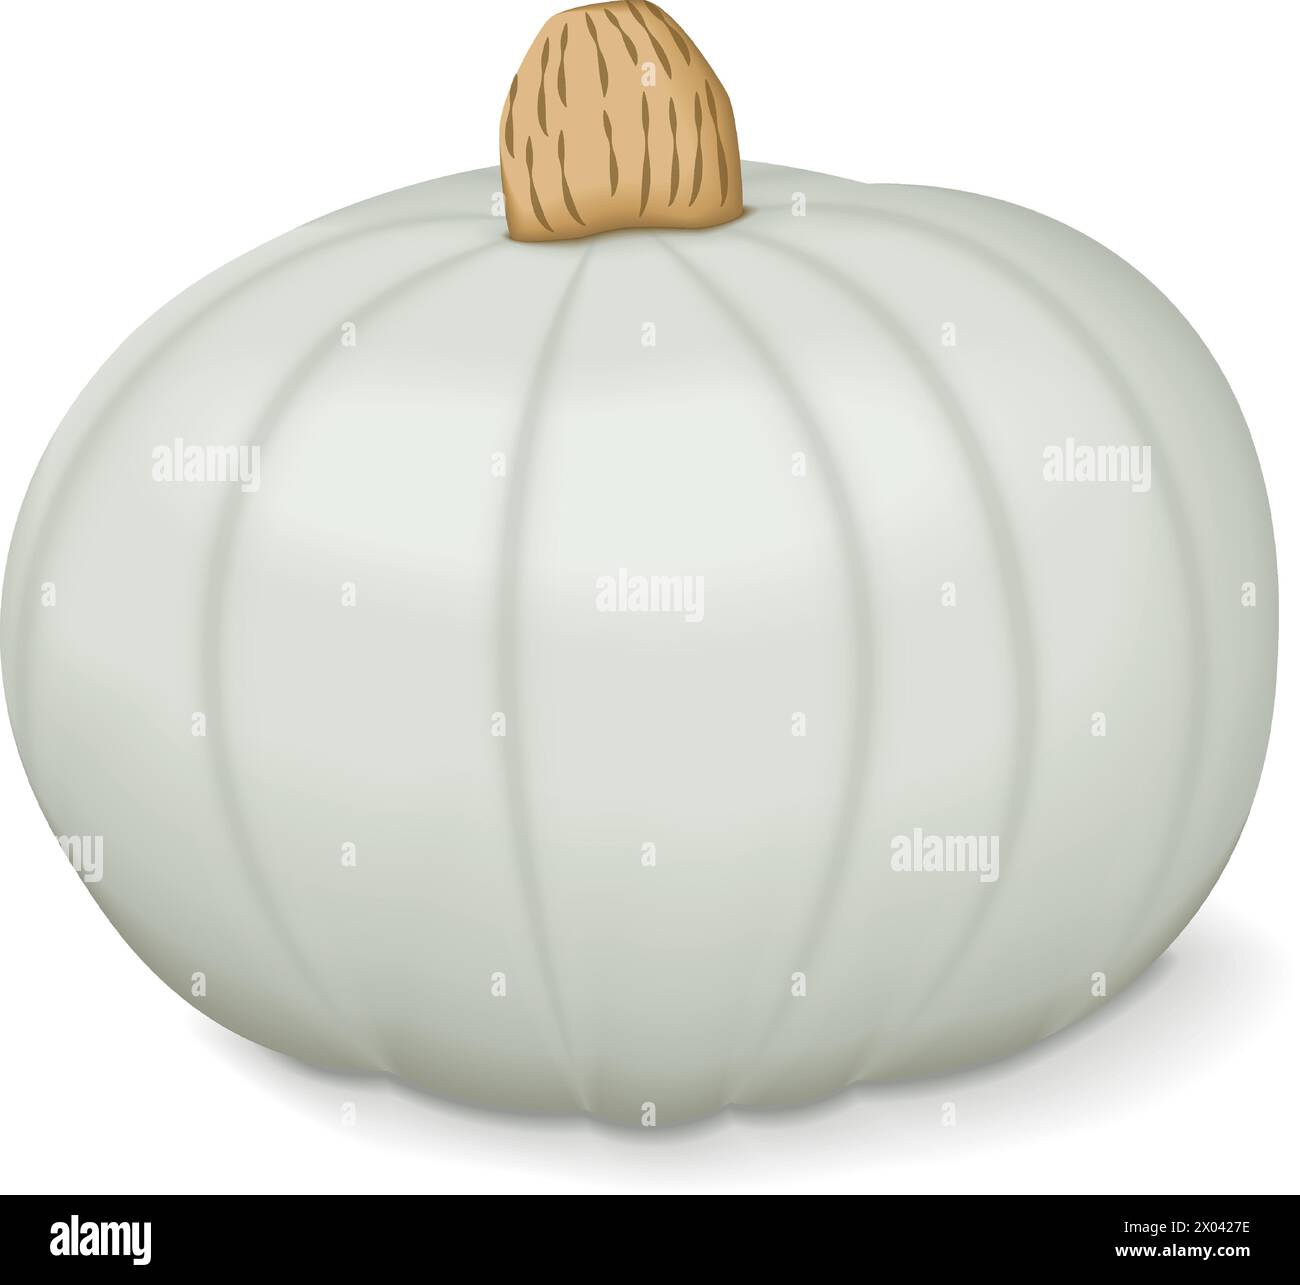 Crown Prince Squash. Winter squash. Cucurbita maxima. Fruits and vegetables. Isolated vector illustration. Stock Vector